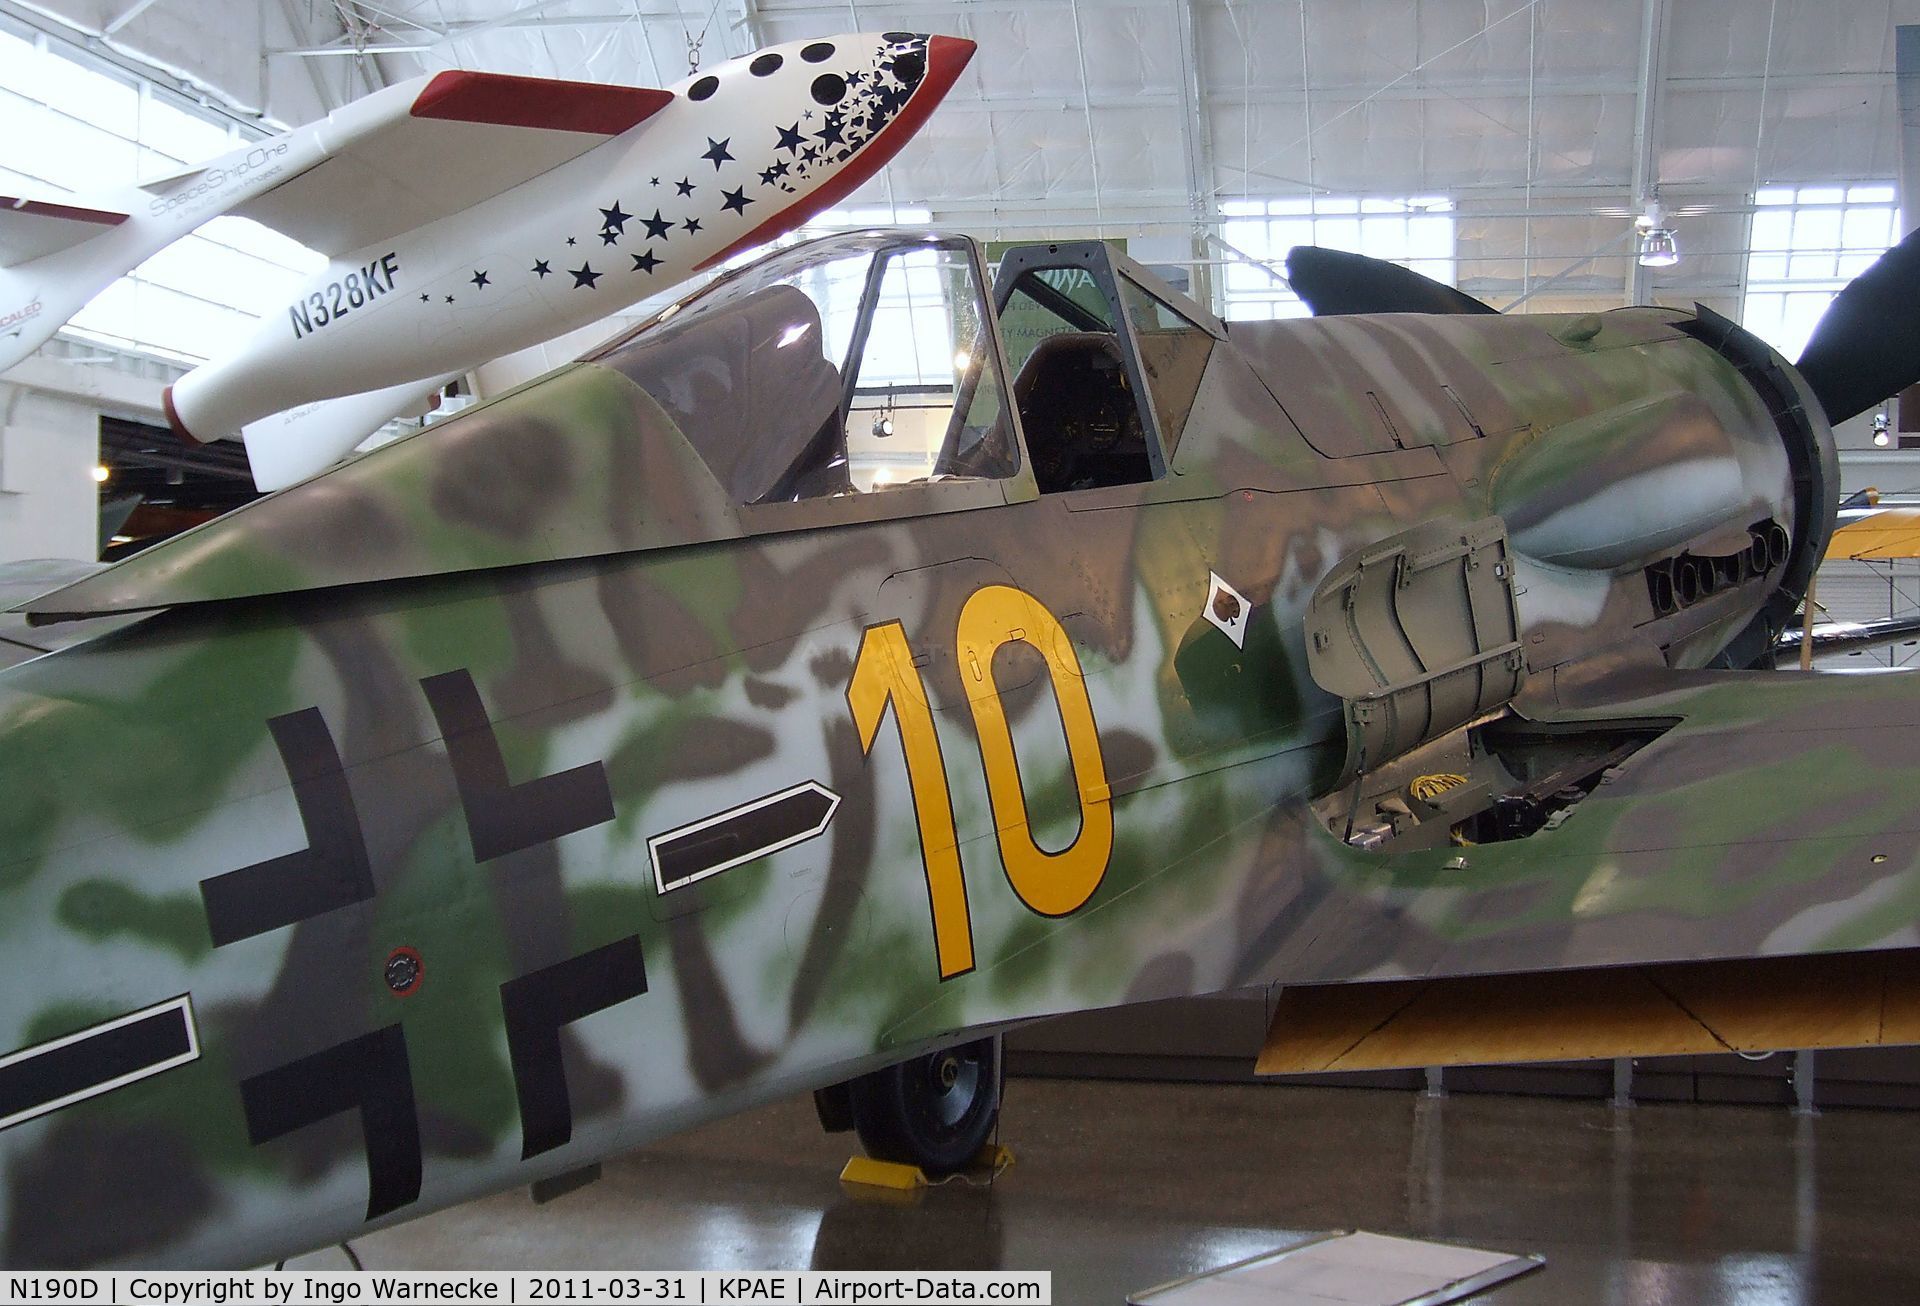 N190D, Focke-Wulf Fw-190D-13/R11 C/N 836017, Focke-Wulf Fw 190D-13 at the Flying Heritage Collection, Everett WA